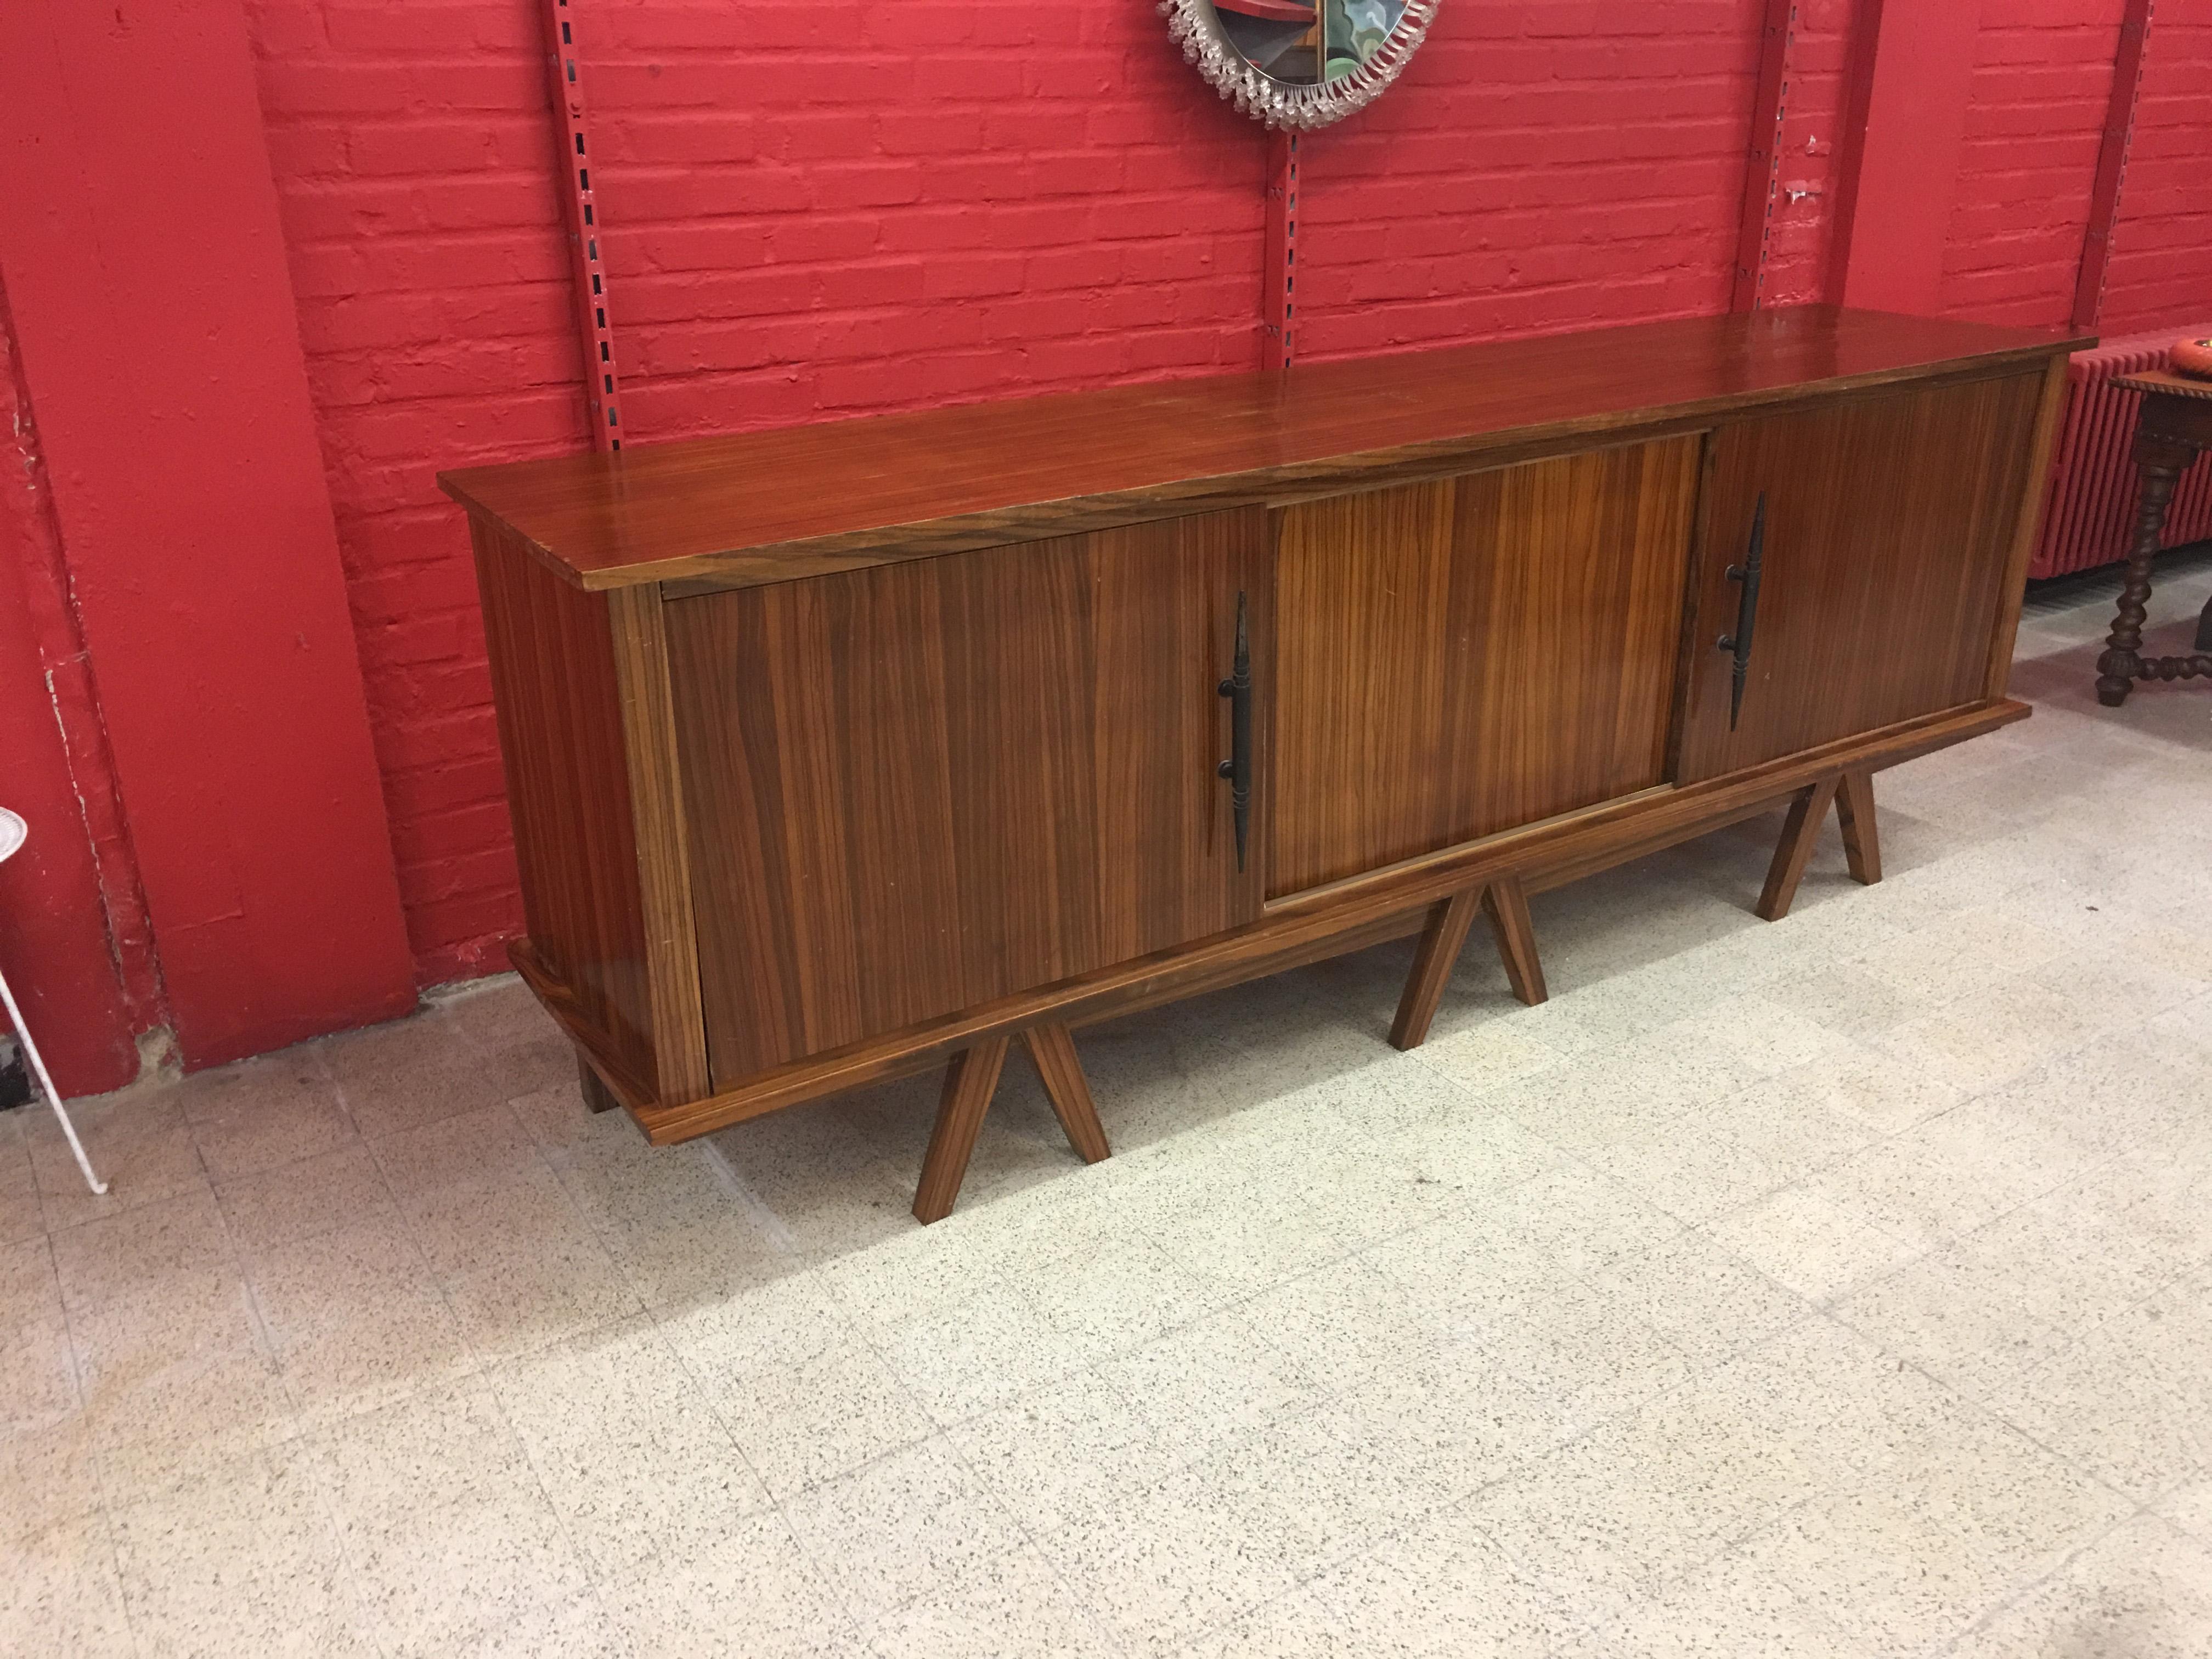  Zebra Wood and wrought iron brutalist Sideboard circa 1950 In Good Condition For Sale In Saint-Ouen, FR